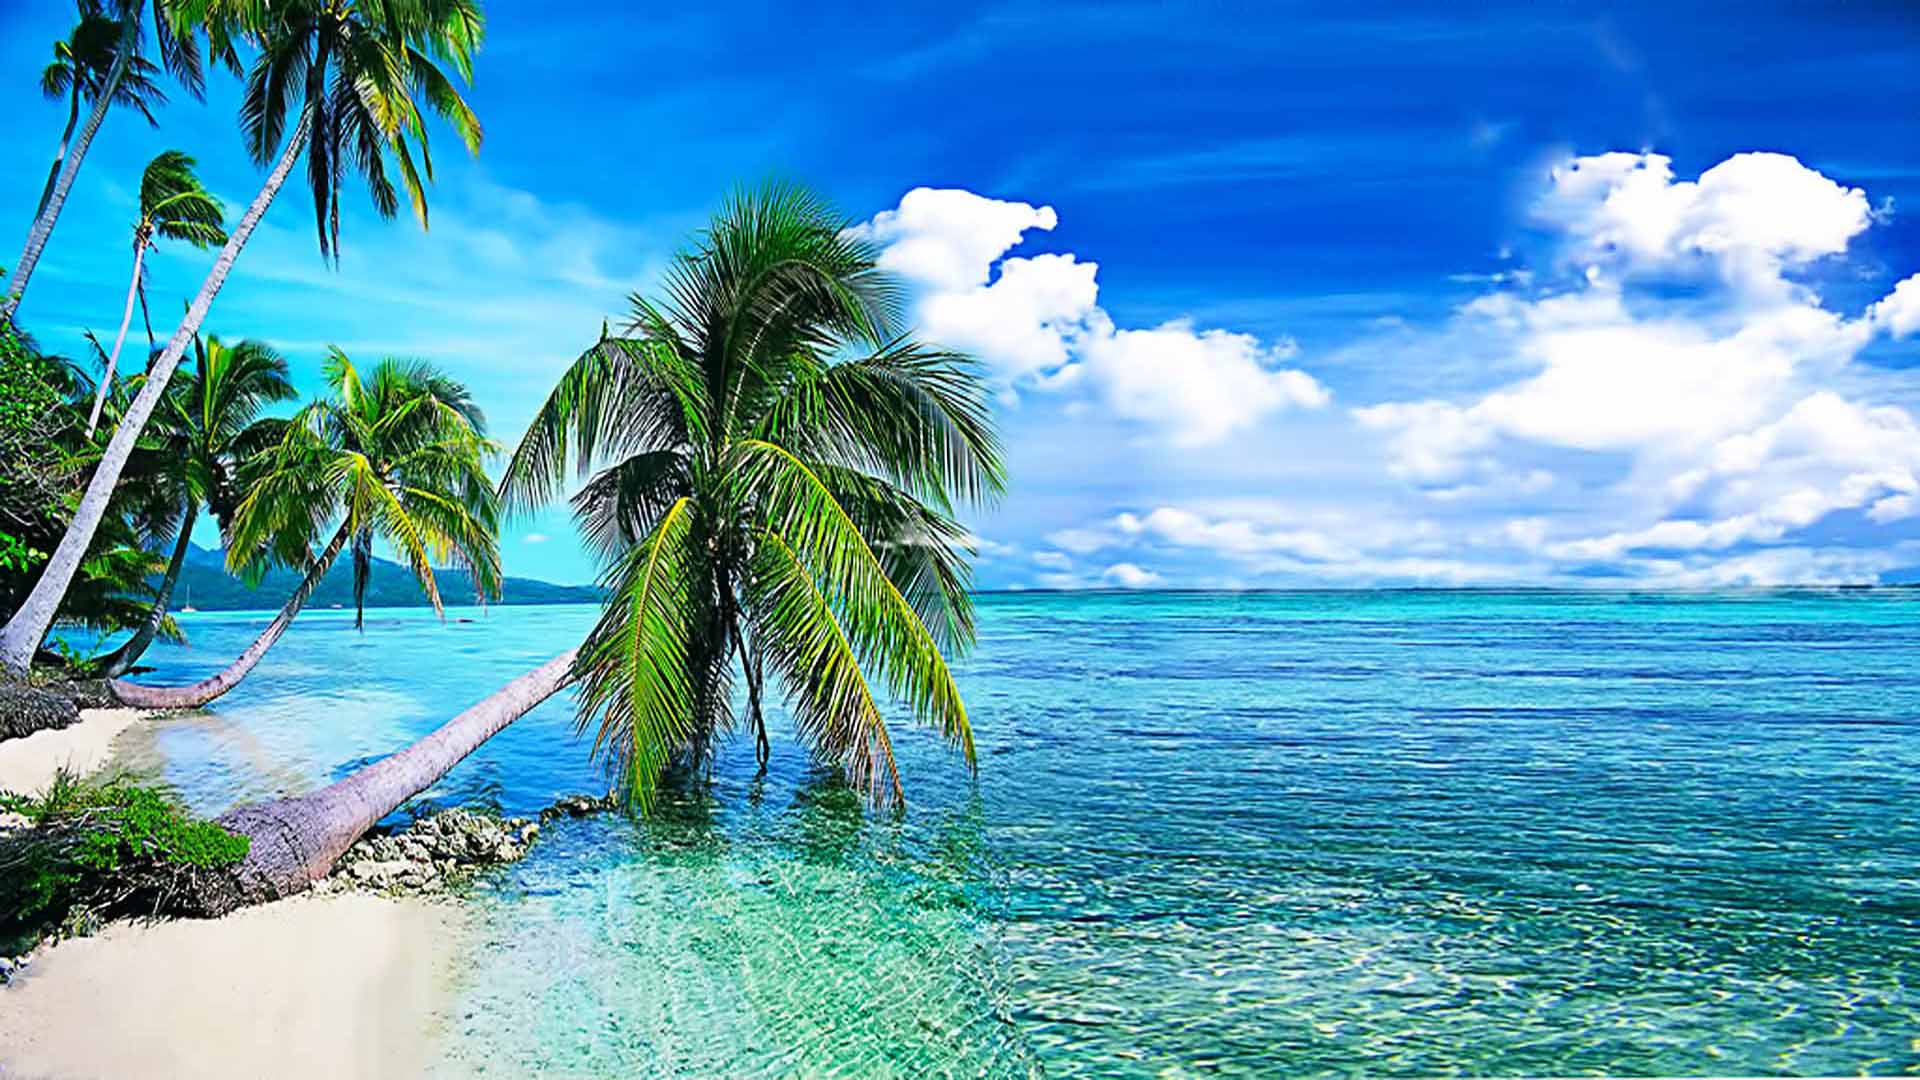 Summer Background, Tropical Beach With Palmi.okean With Crystal Clear Water And White Clouds In The Sky Desktop Wallpaper Download Free 1920x1200, Wallpaper13.com